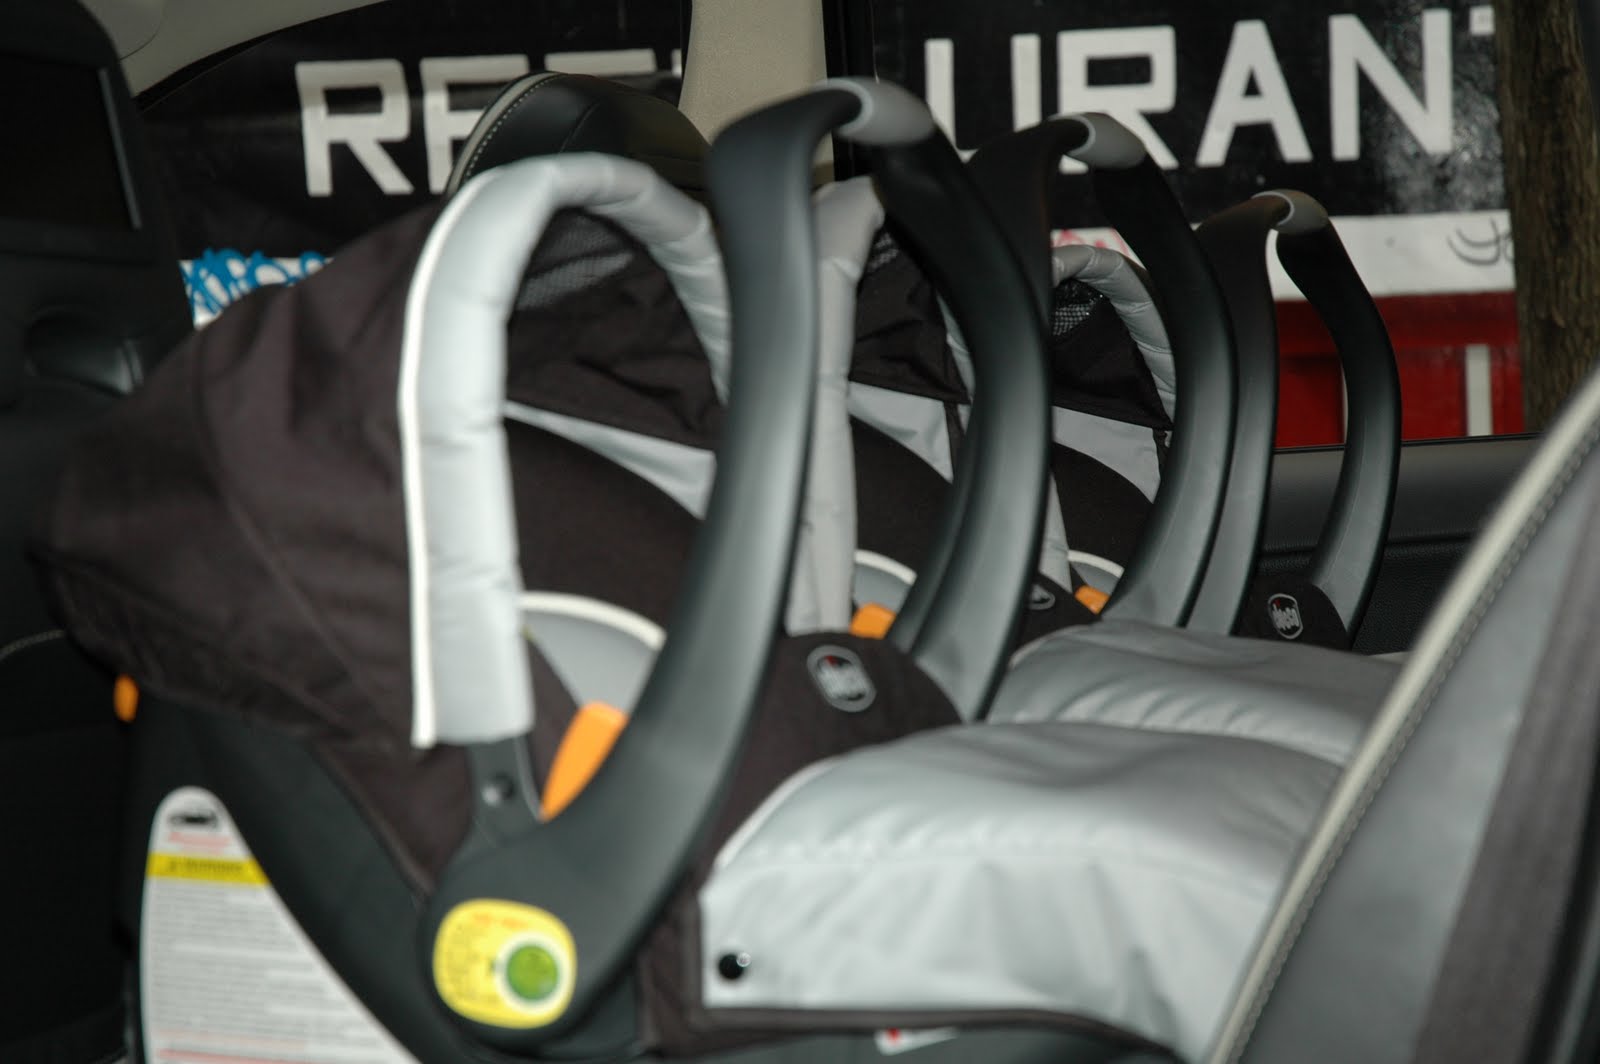 best infant car seat for small backseat